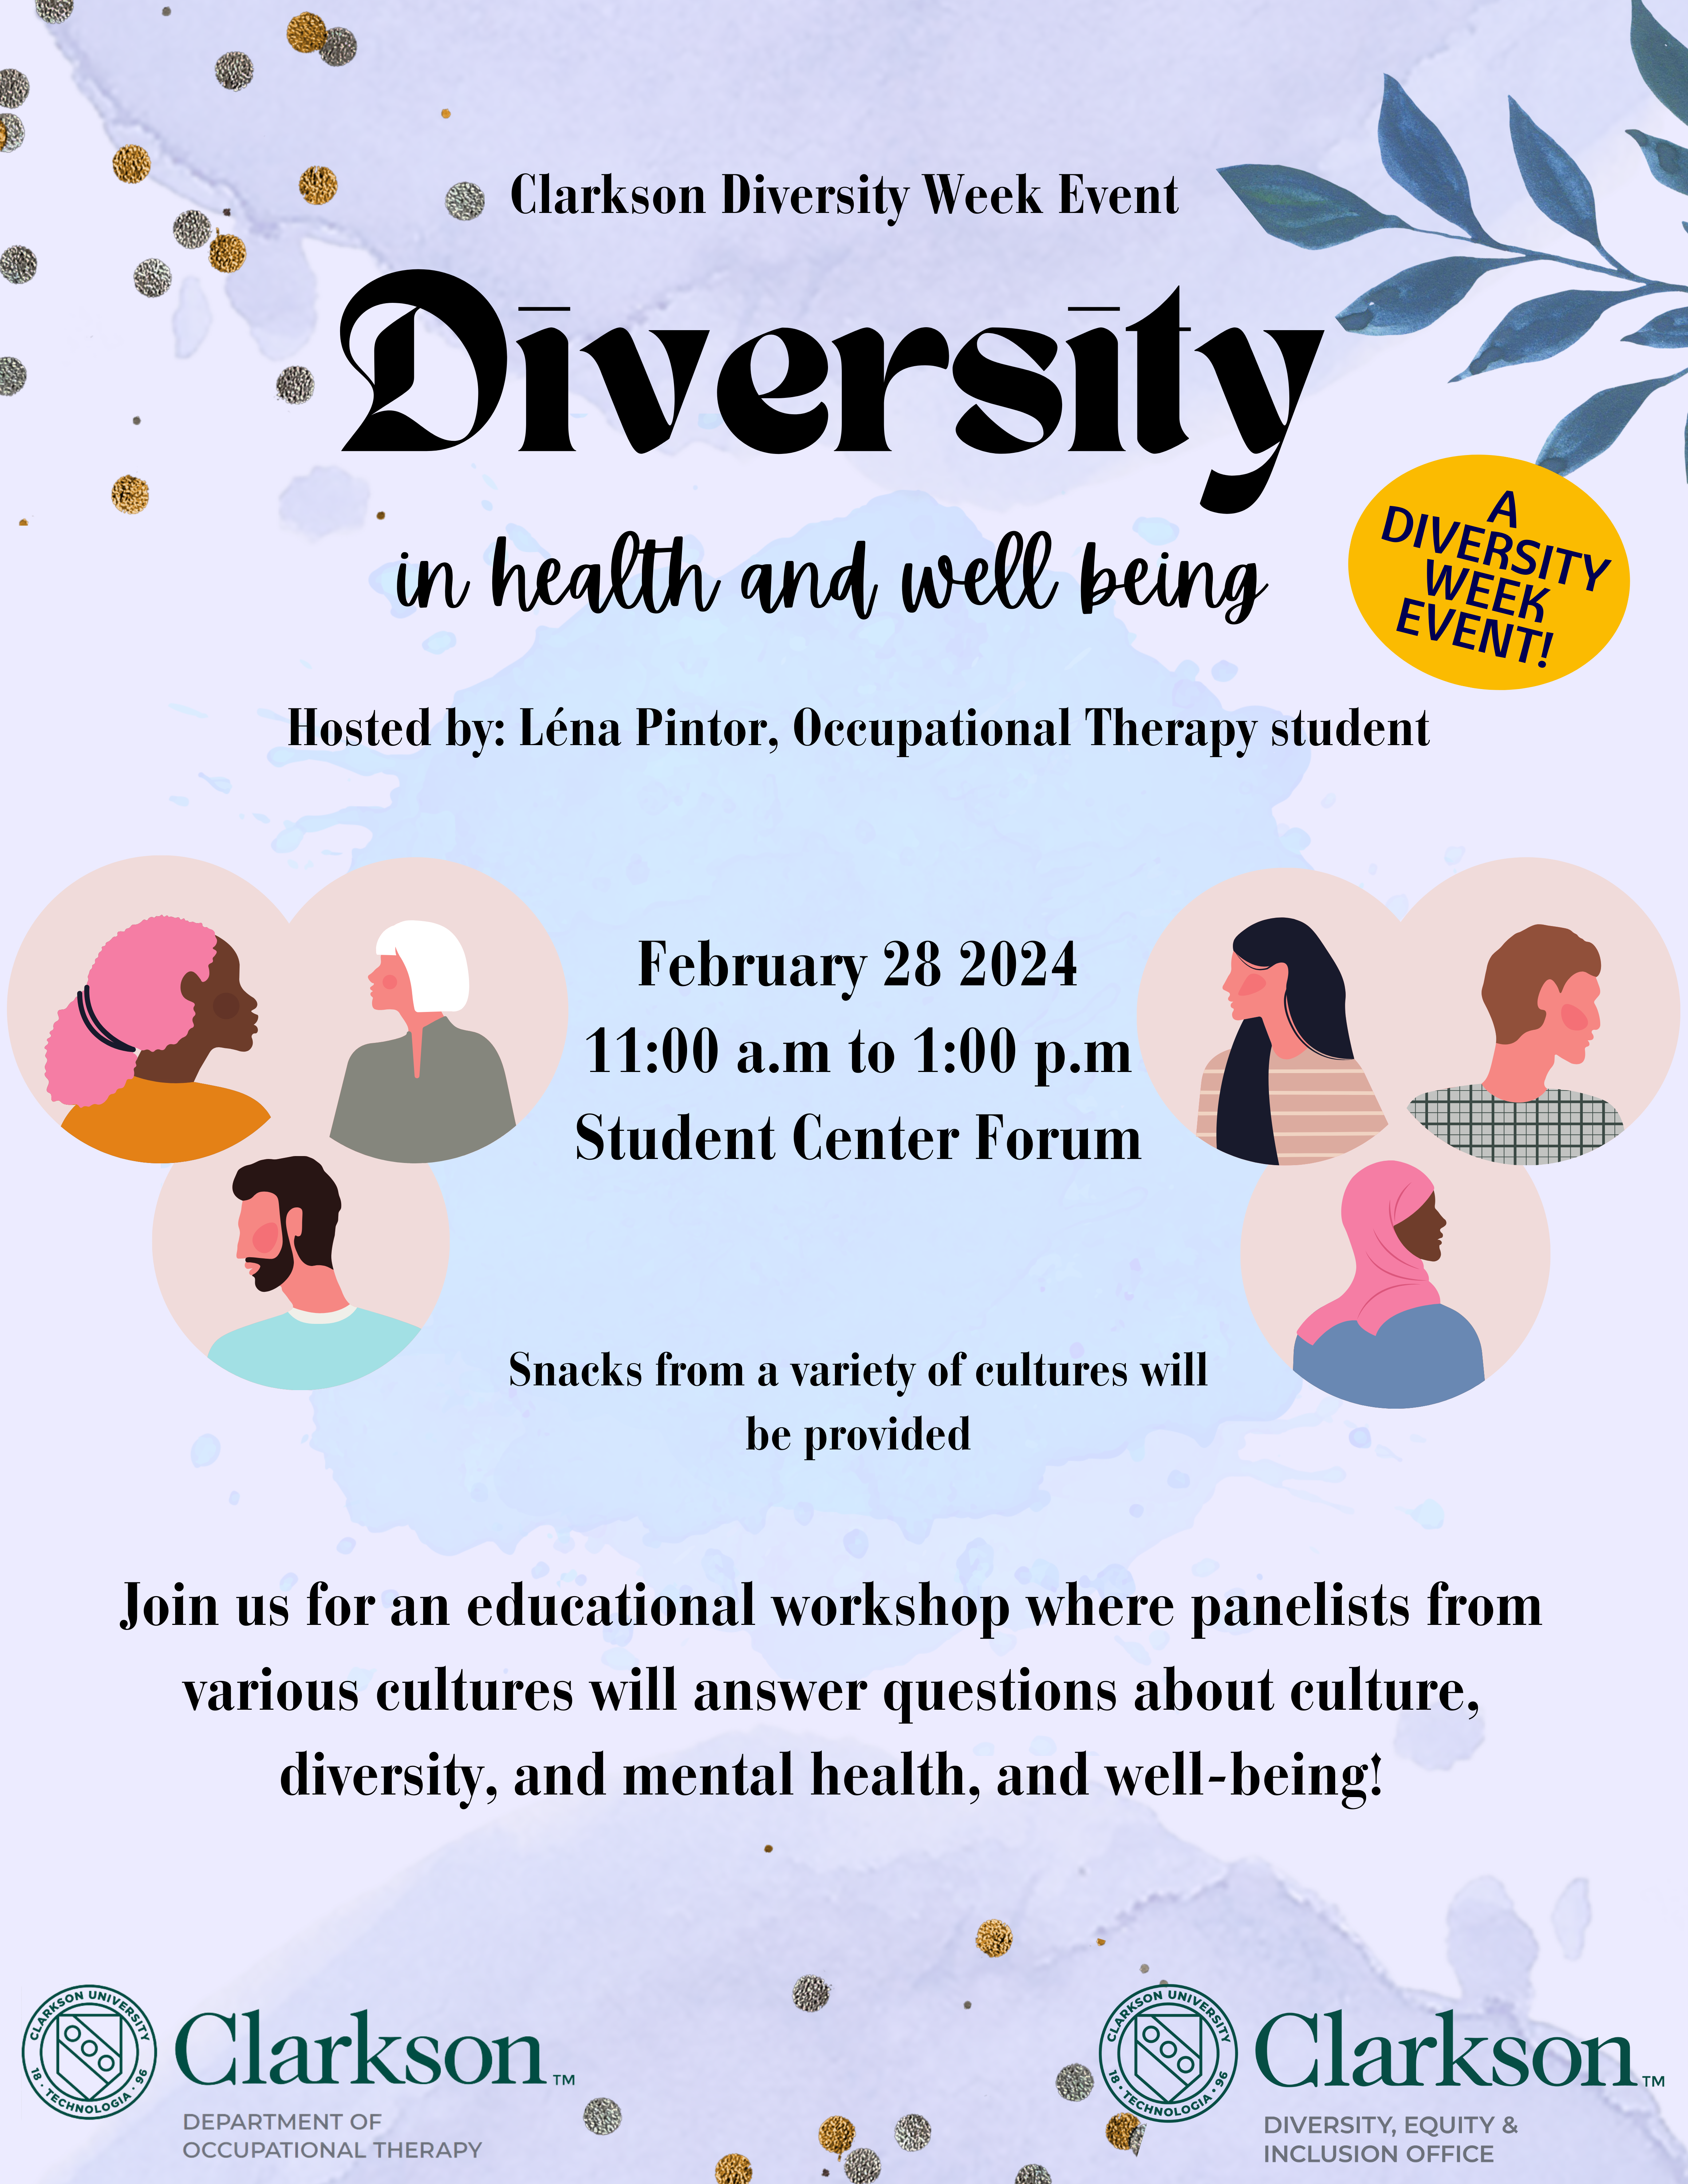 Diversity Week: Diversity in Health and Well Being